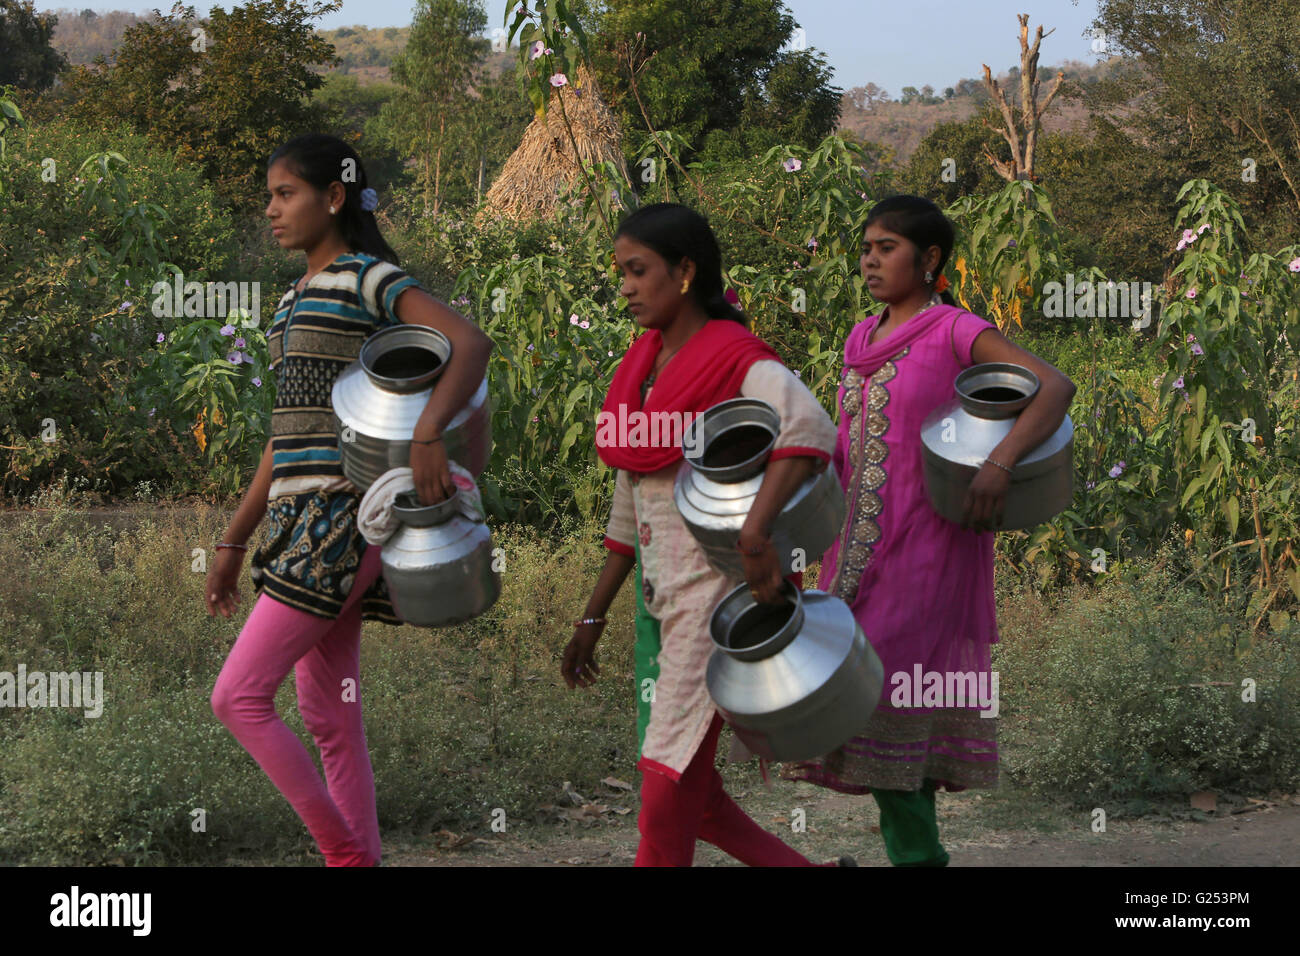 ANDH TRIBE - Girls carrying empty water pots to fill with water. Londari Village, Maharashtra, India Stock Photo